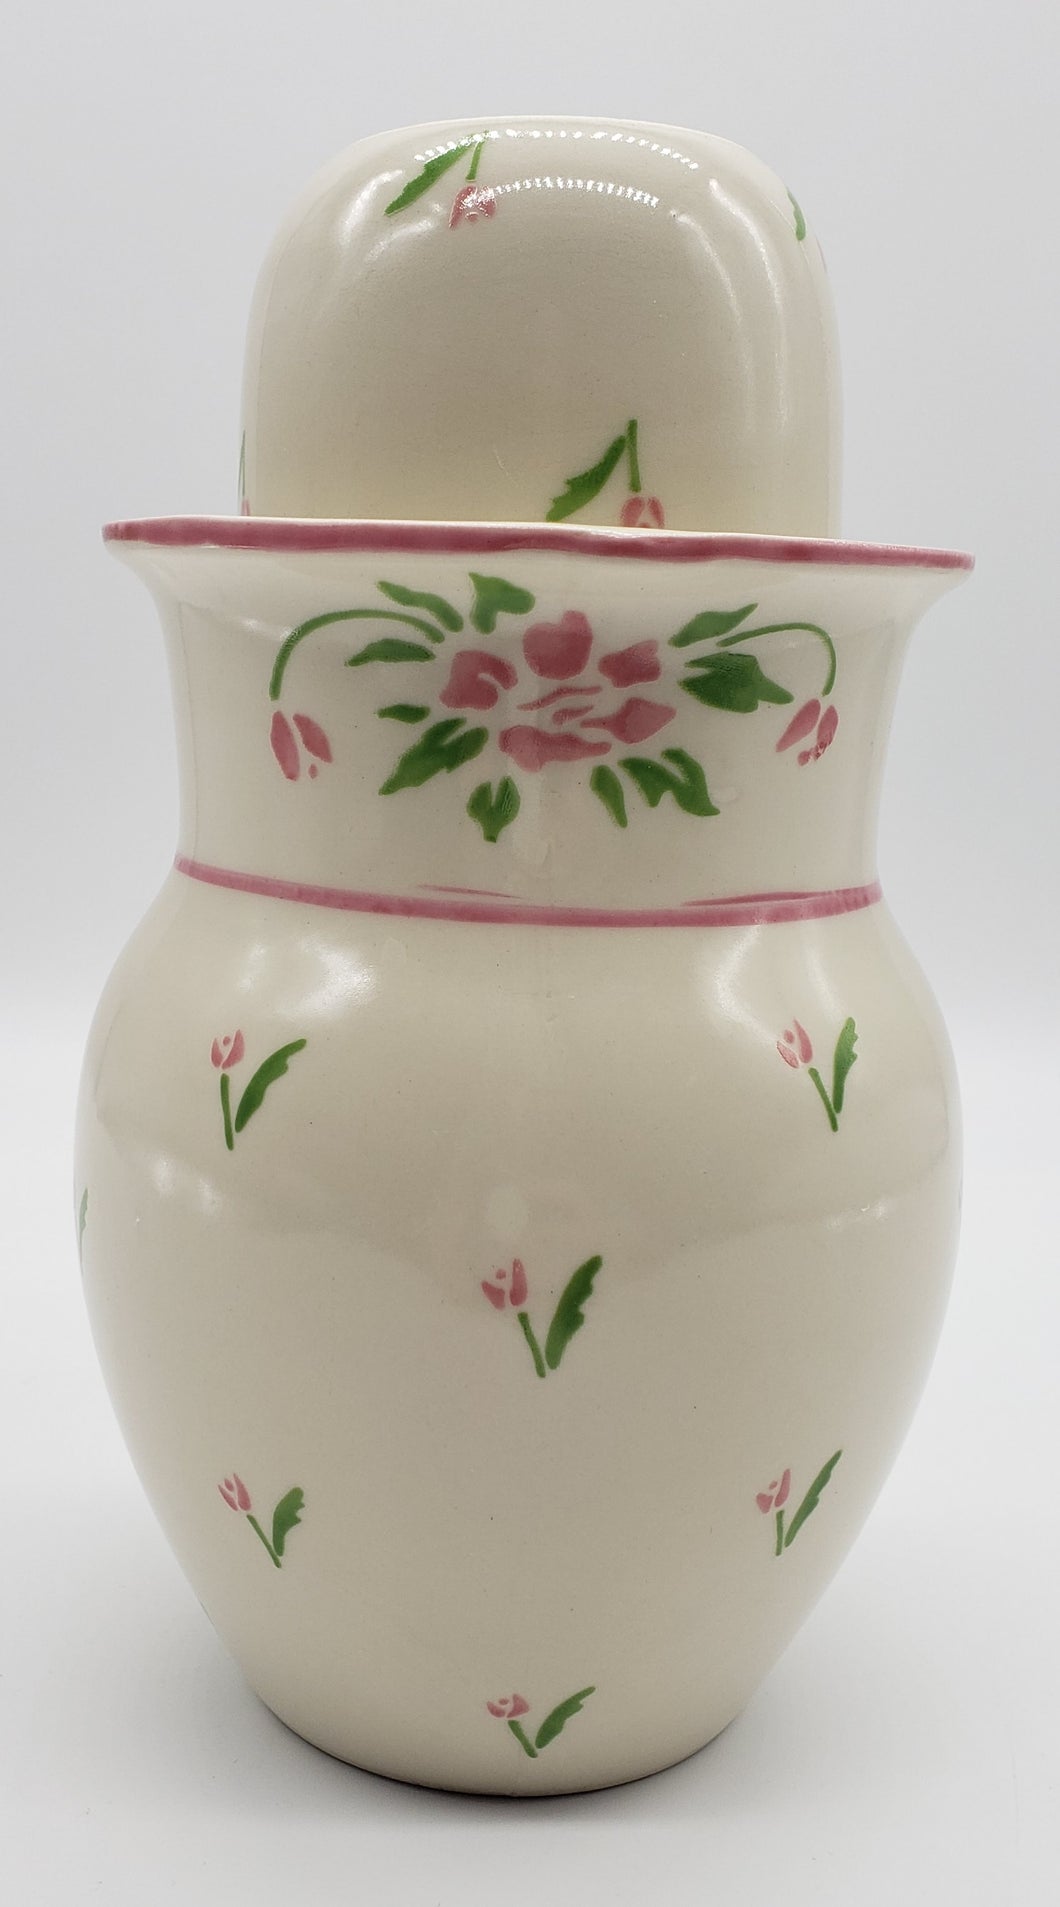 Teleflora Tumble Up Bedside Carafe Water Cup Cottagecore Floral